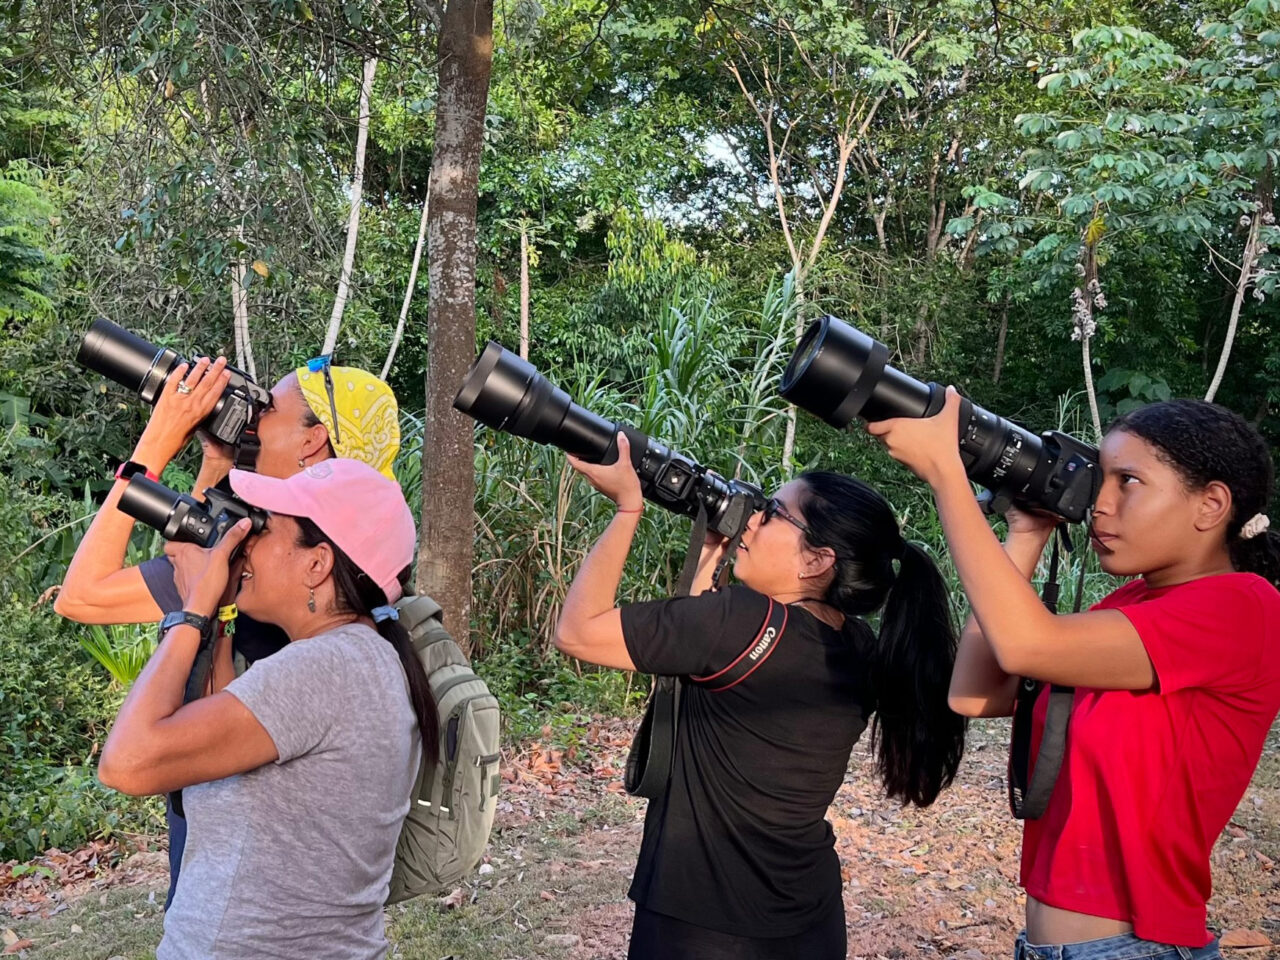 Four people look into the trees through cameras with long telephoto lenses.